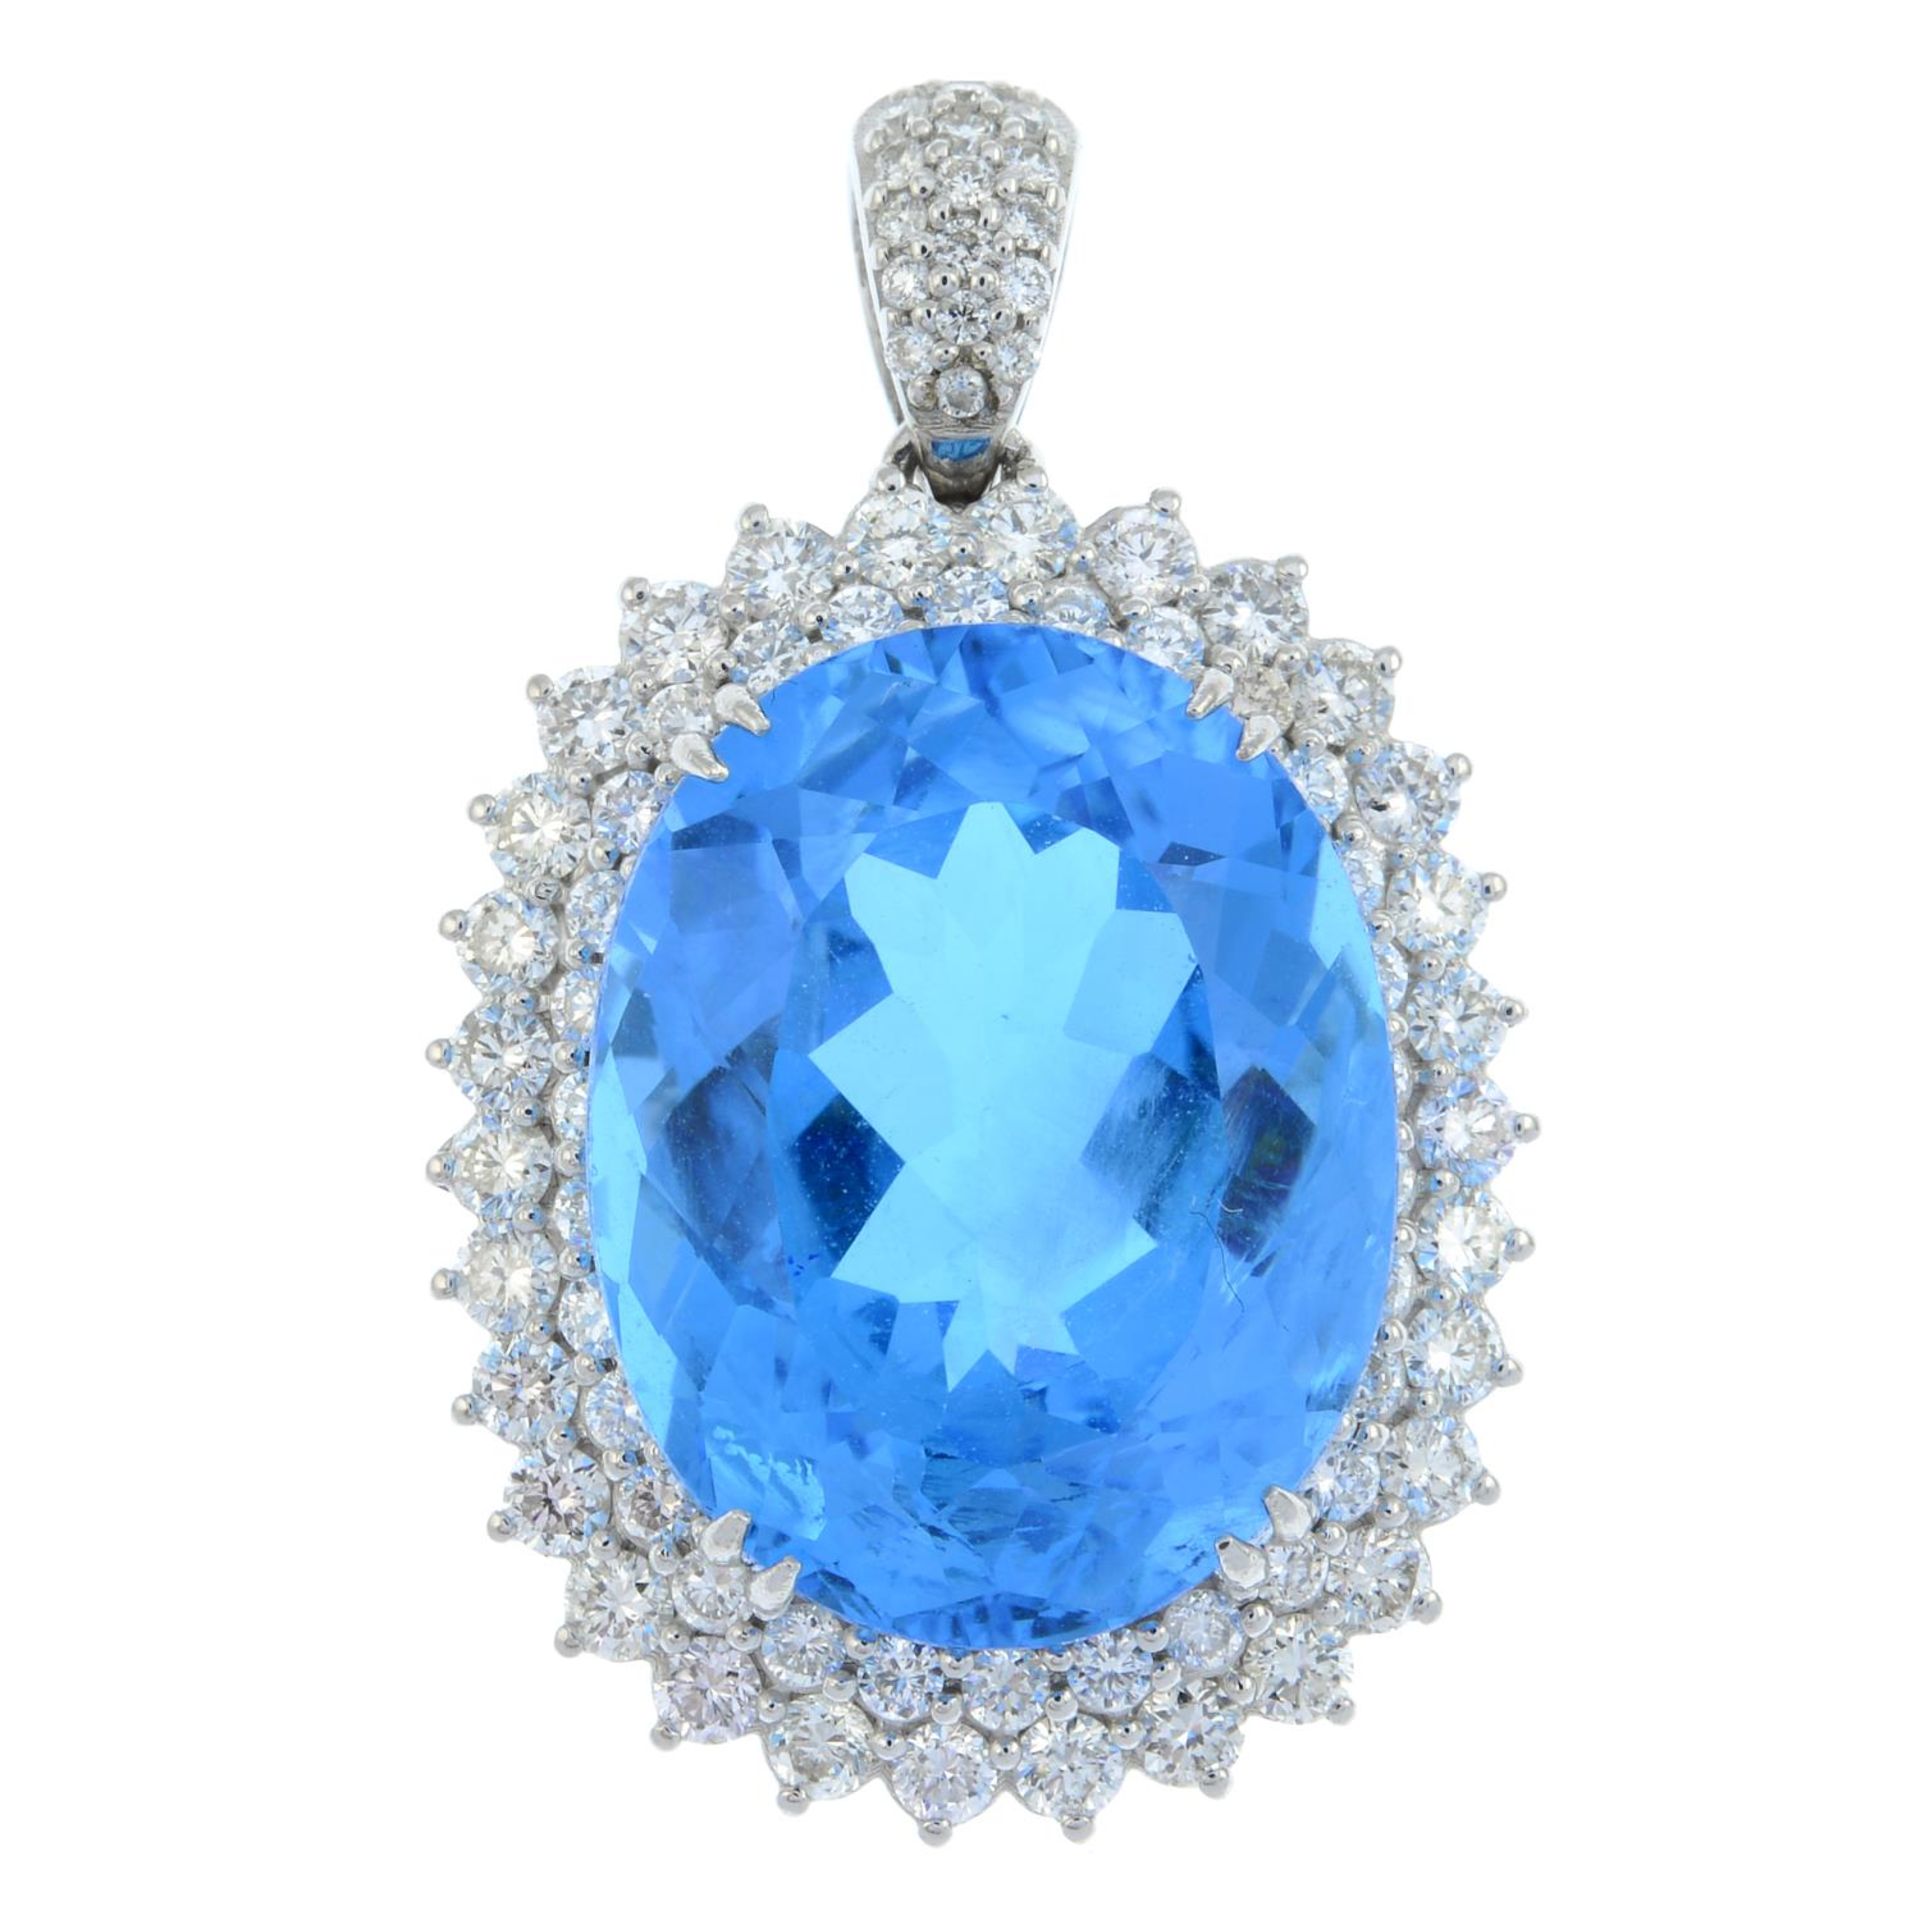 A blue topaz and brilliant-cut diamond cluster pendant.Topaz calculated weight 15.60cts based on